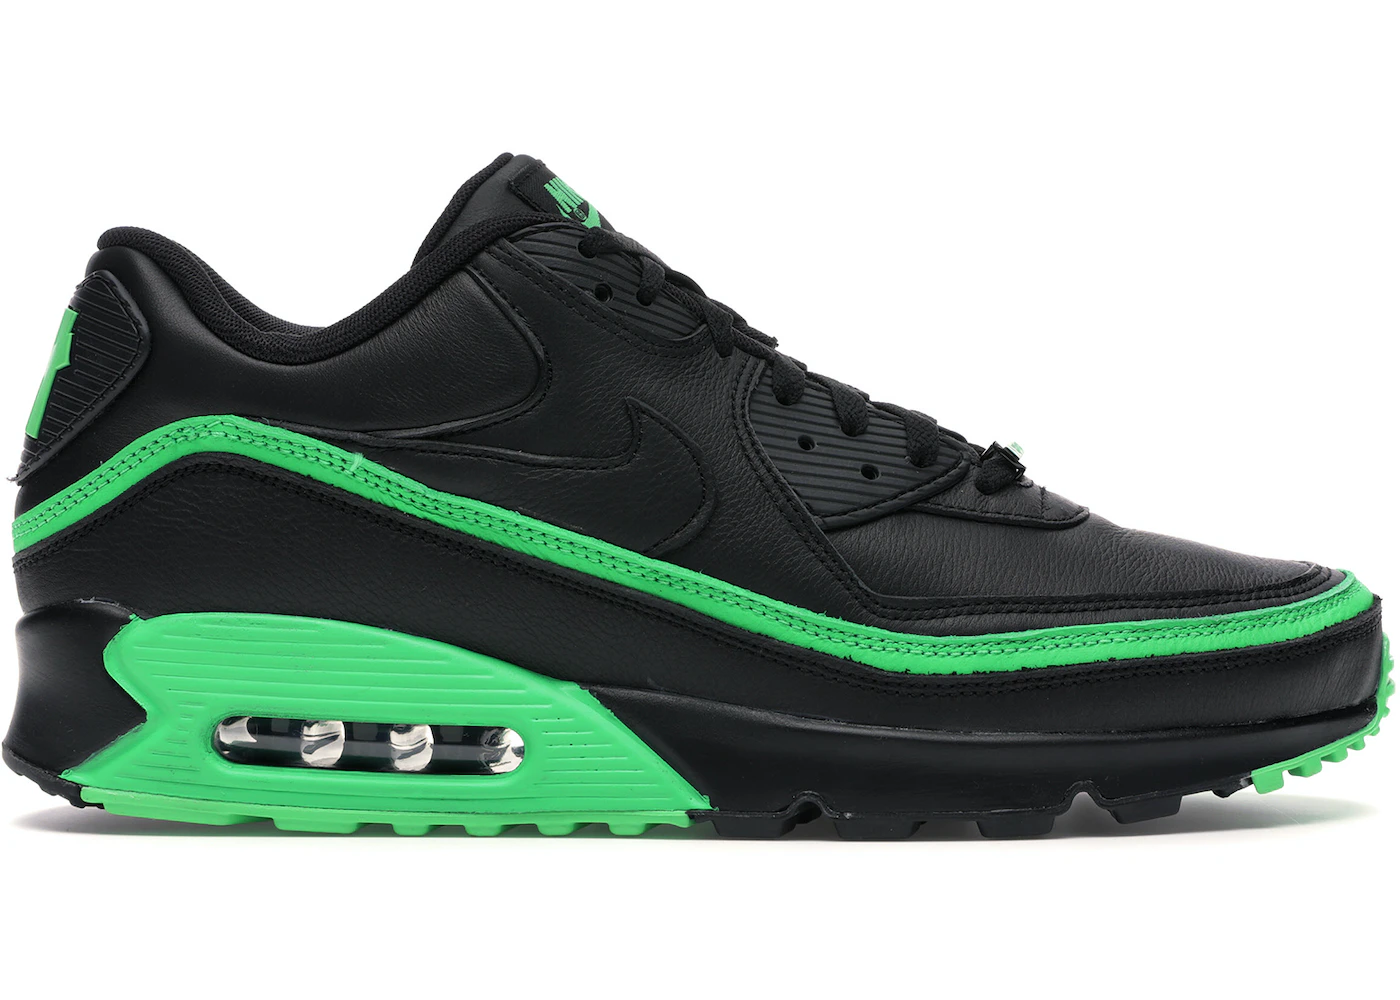 Beg come Mittens Nike Air Max 90 Undefeated Black Green - CJ7197-004